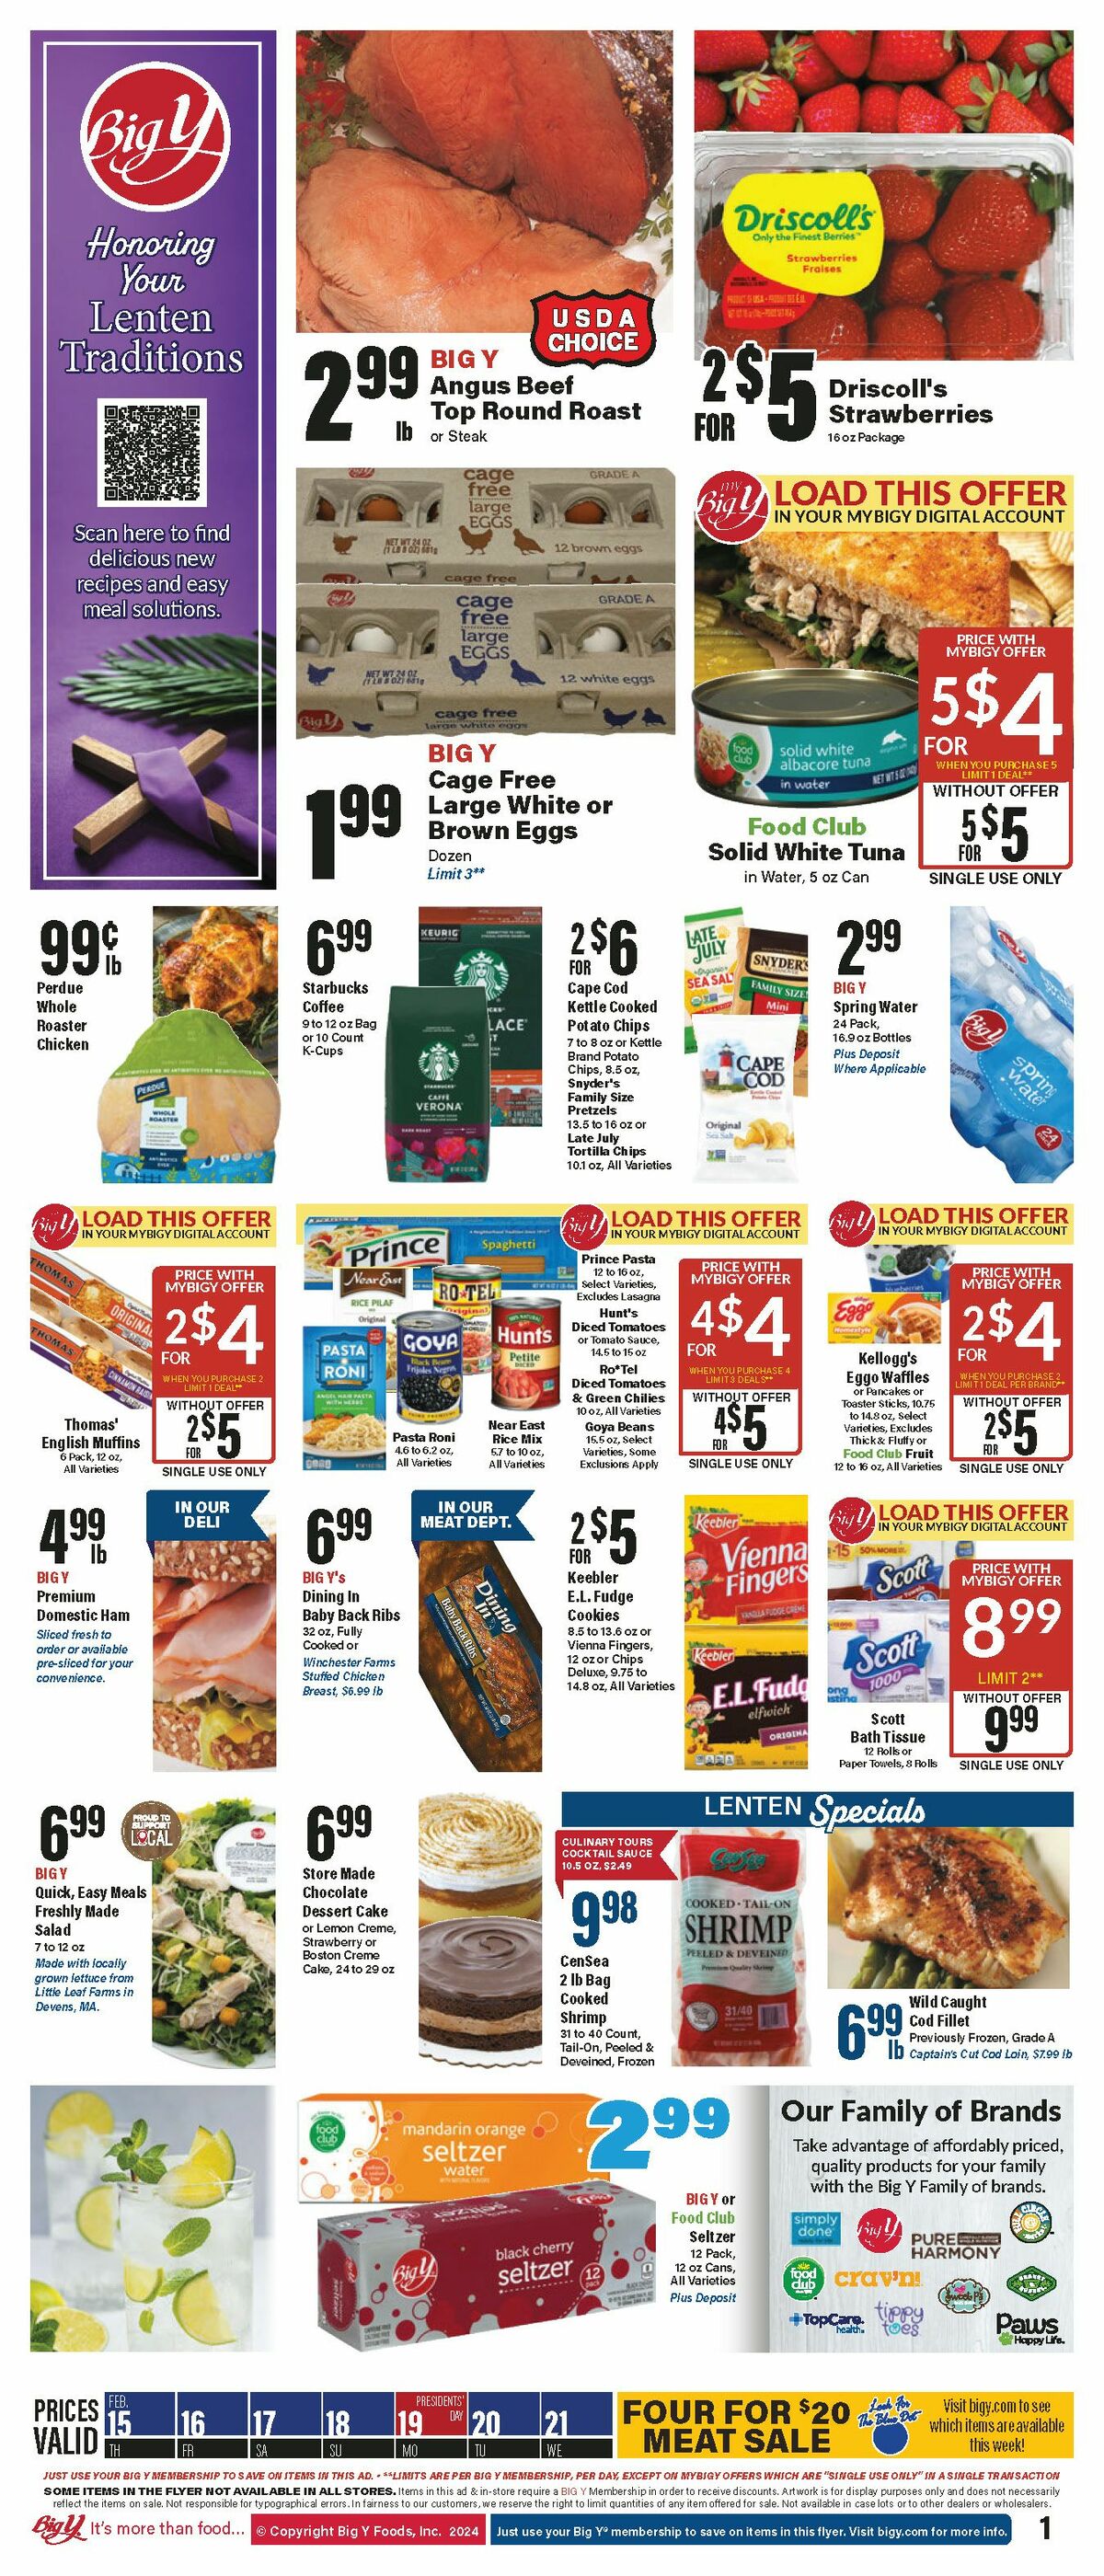 Big Y Weekly Ads & Flyers from February 15